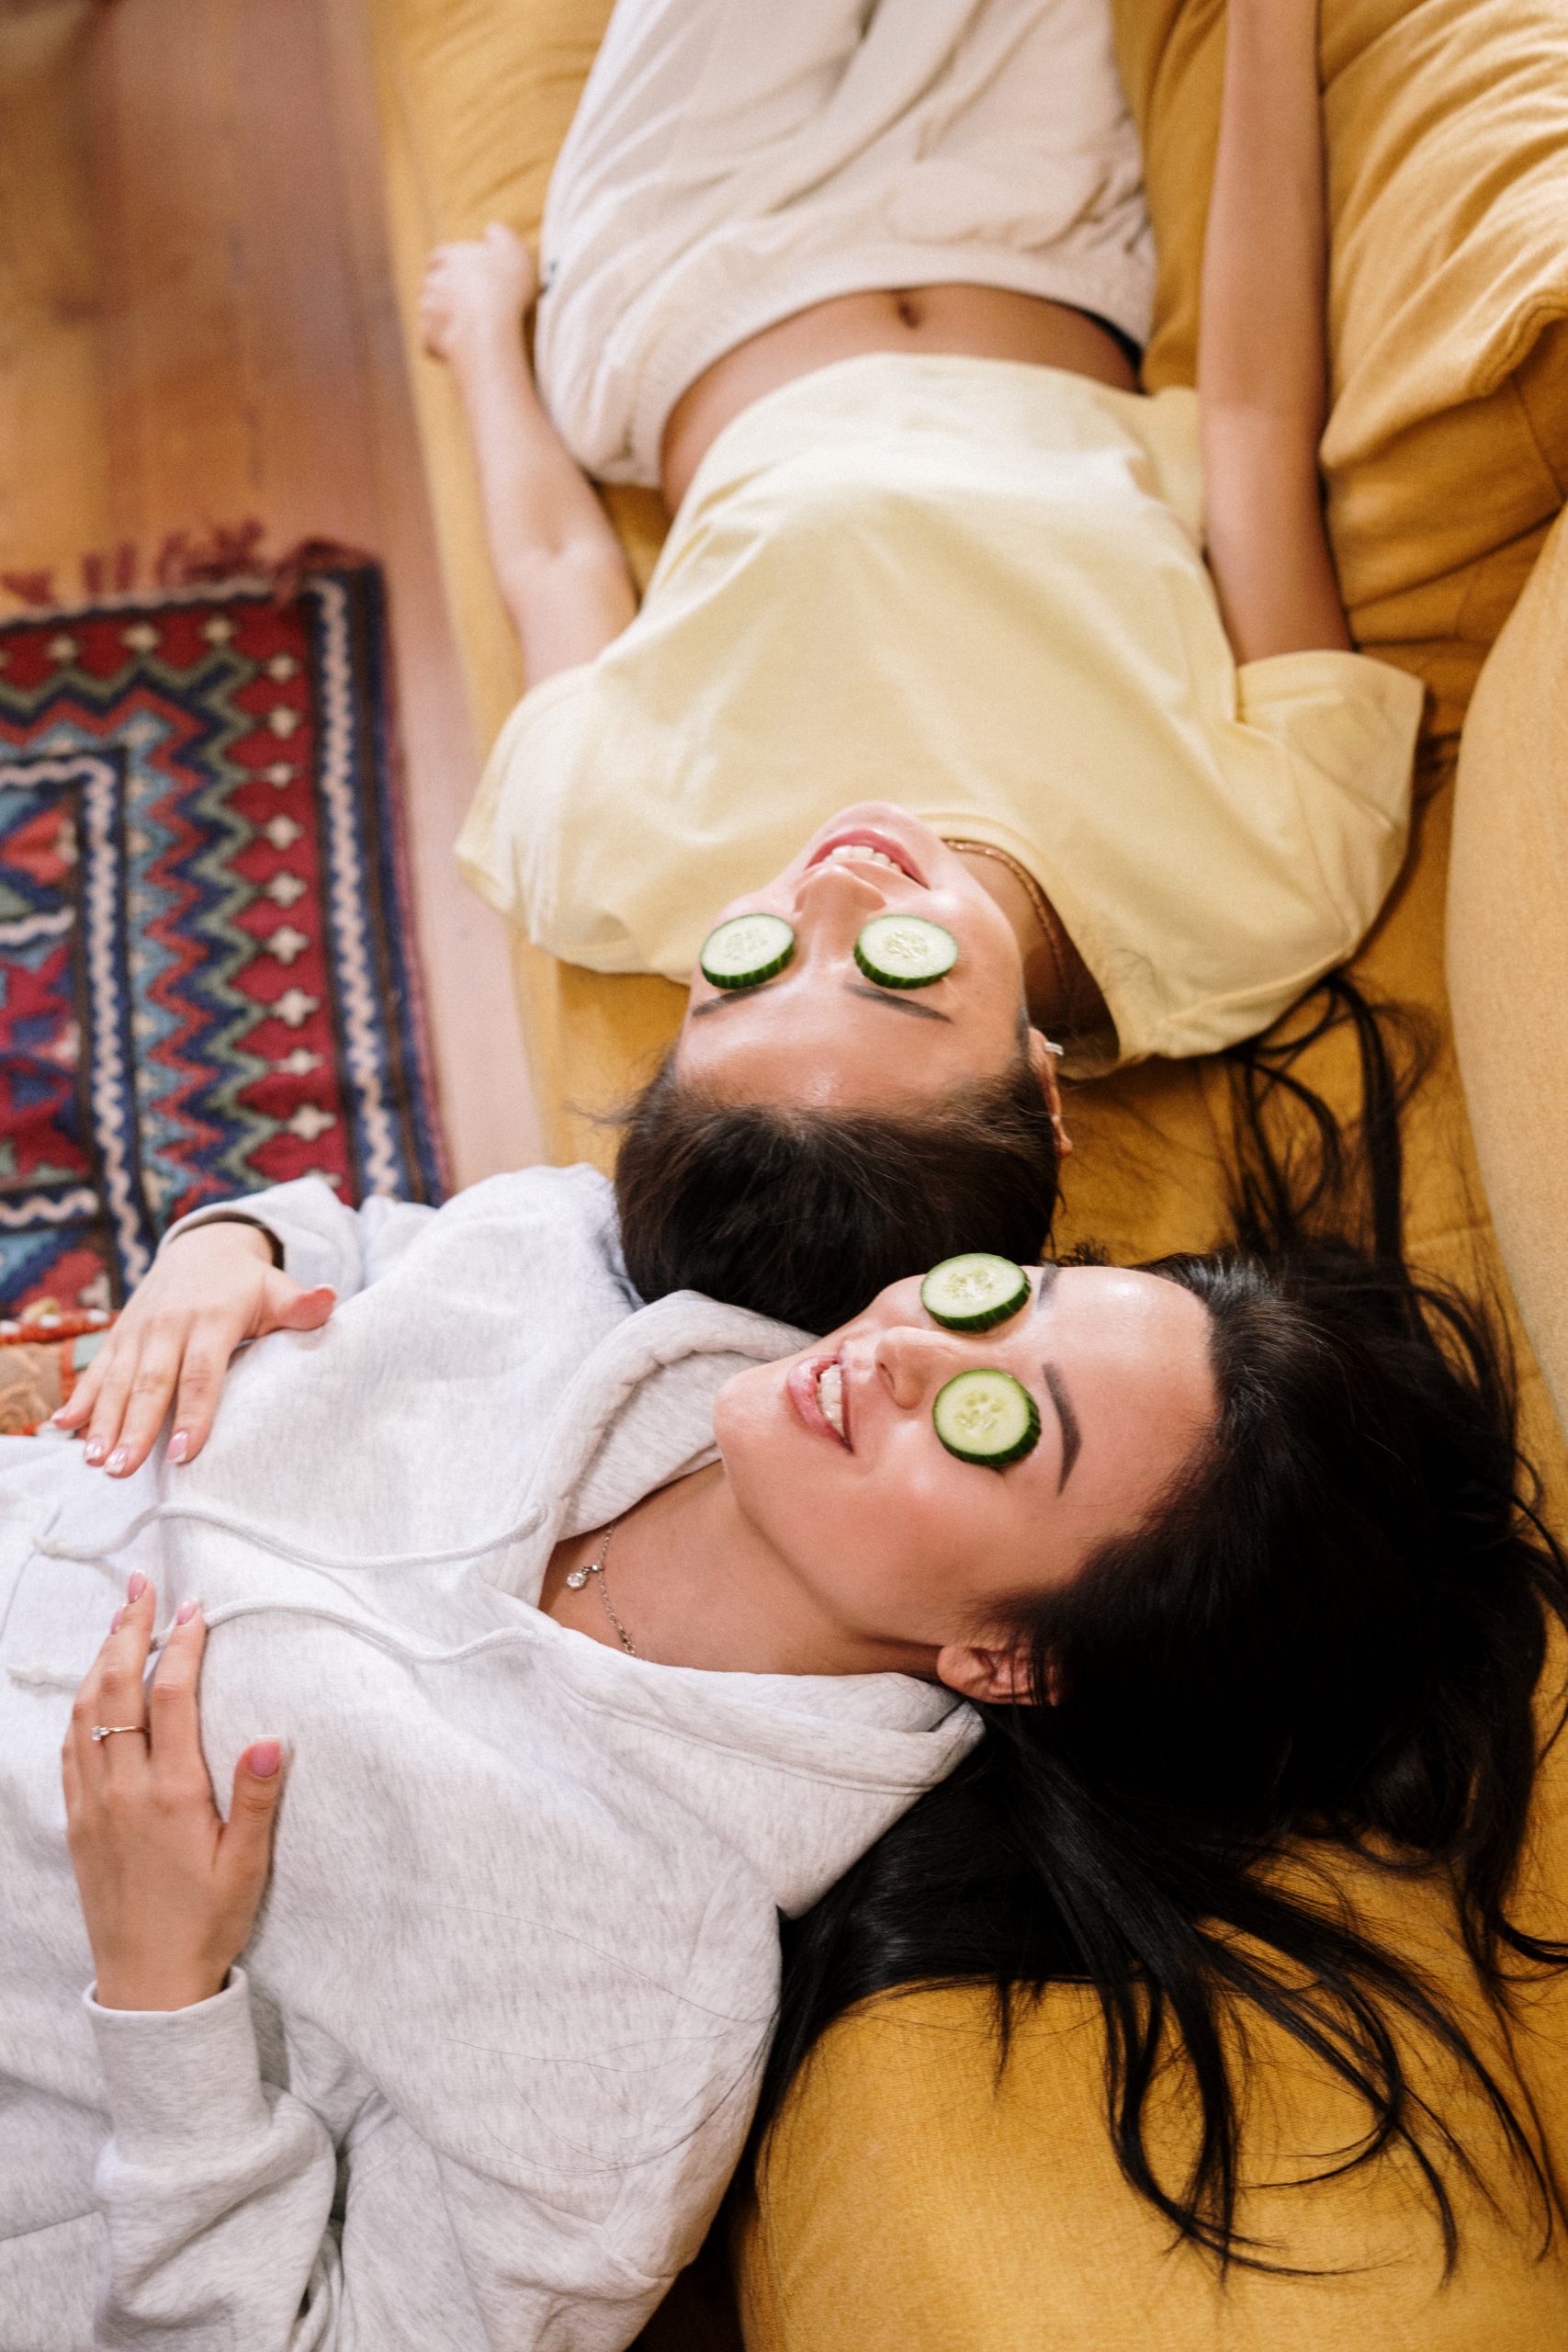 at home date ideas
couple relaxing with cucumbers on eyes
source: cottonbro from Pexels